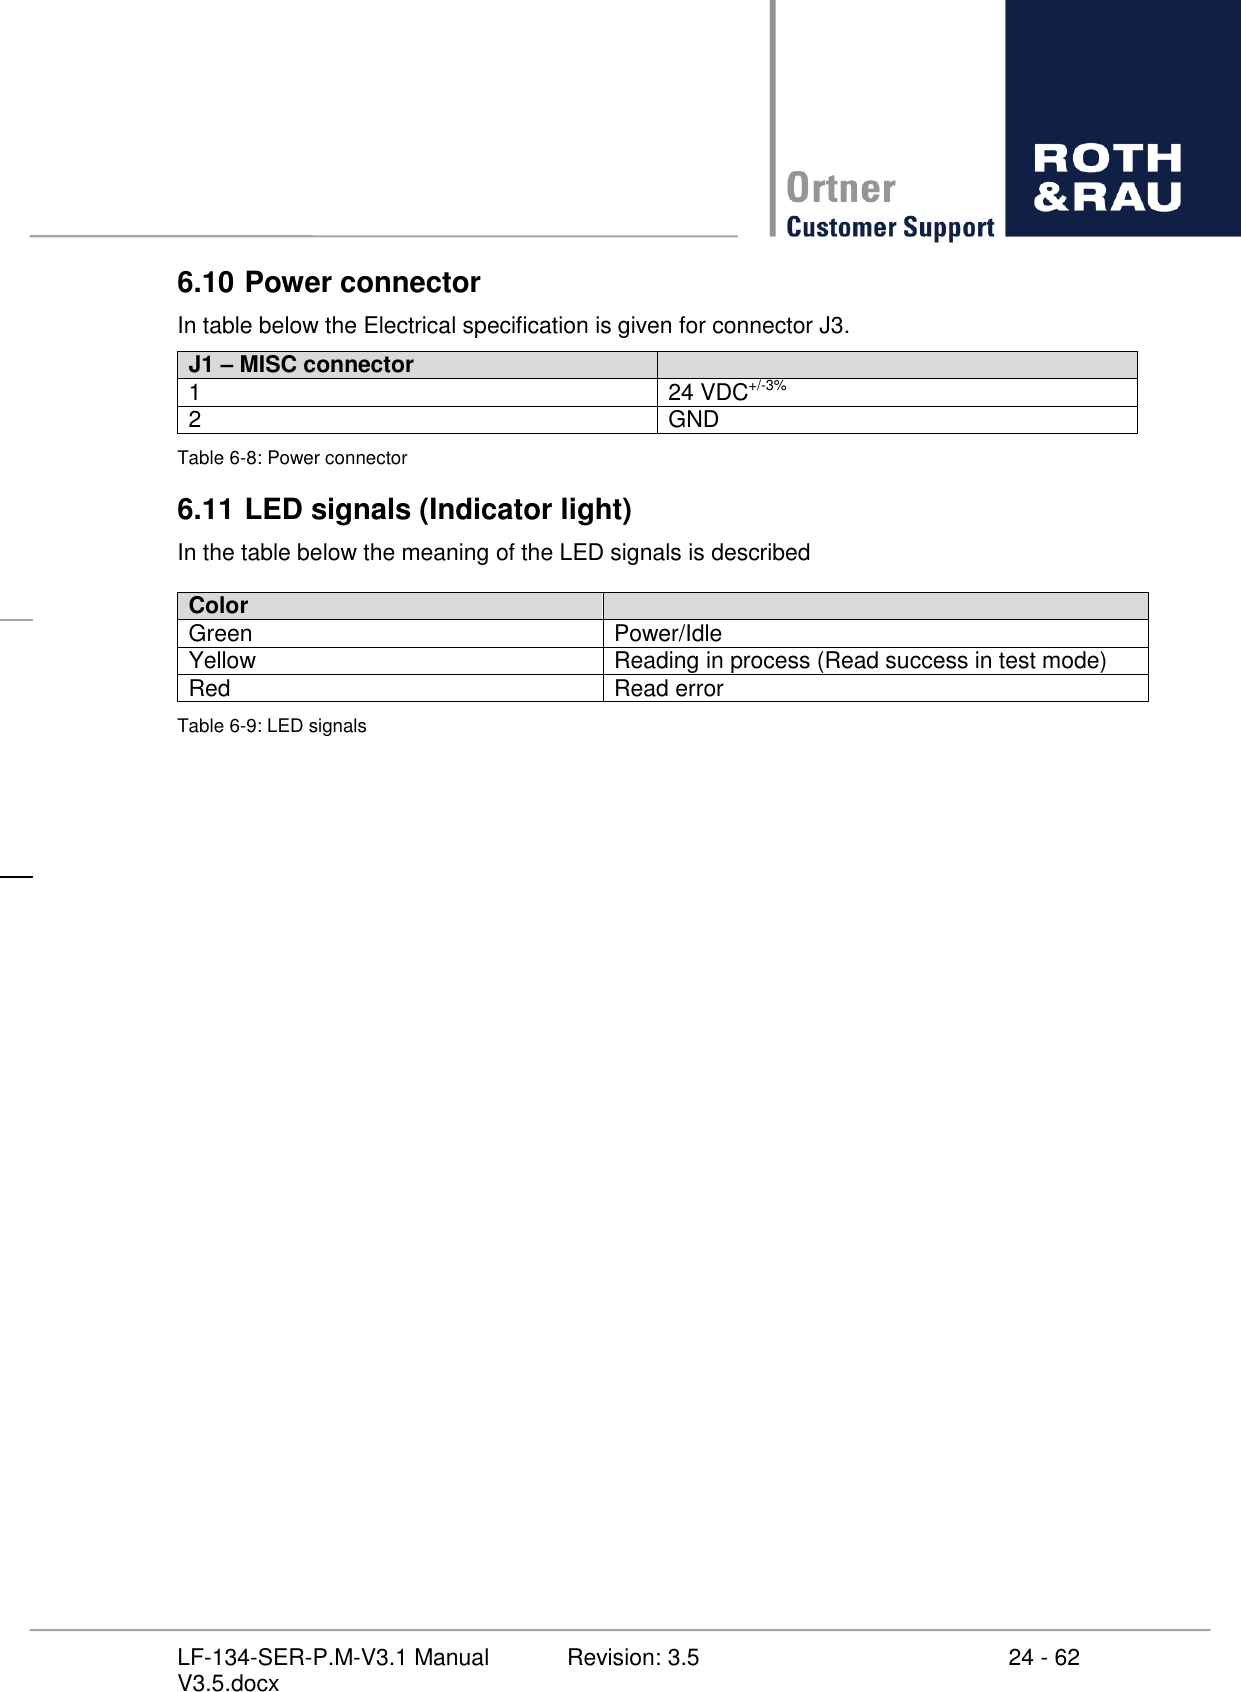     24 - 62 Revision: 3.5 LF-134-SER-P.M-V3.1 Manual V3.5.docx 6.10  Power connector In table below the Electrical specification is given for connector J3. J1 – MISC connector  1 24 VDC+/-3% 2 GND Table 6-8: Power connector 6.11  LED signals (Indicator light) In the table below the meaning of the LED signals is described  Color  Green Power/Idle Yellow Reading in process (Read success in test mode) Red Read error Table 6-9: LED signals 